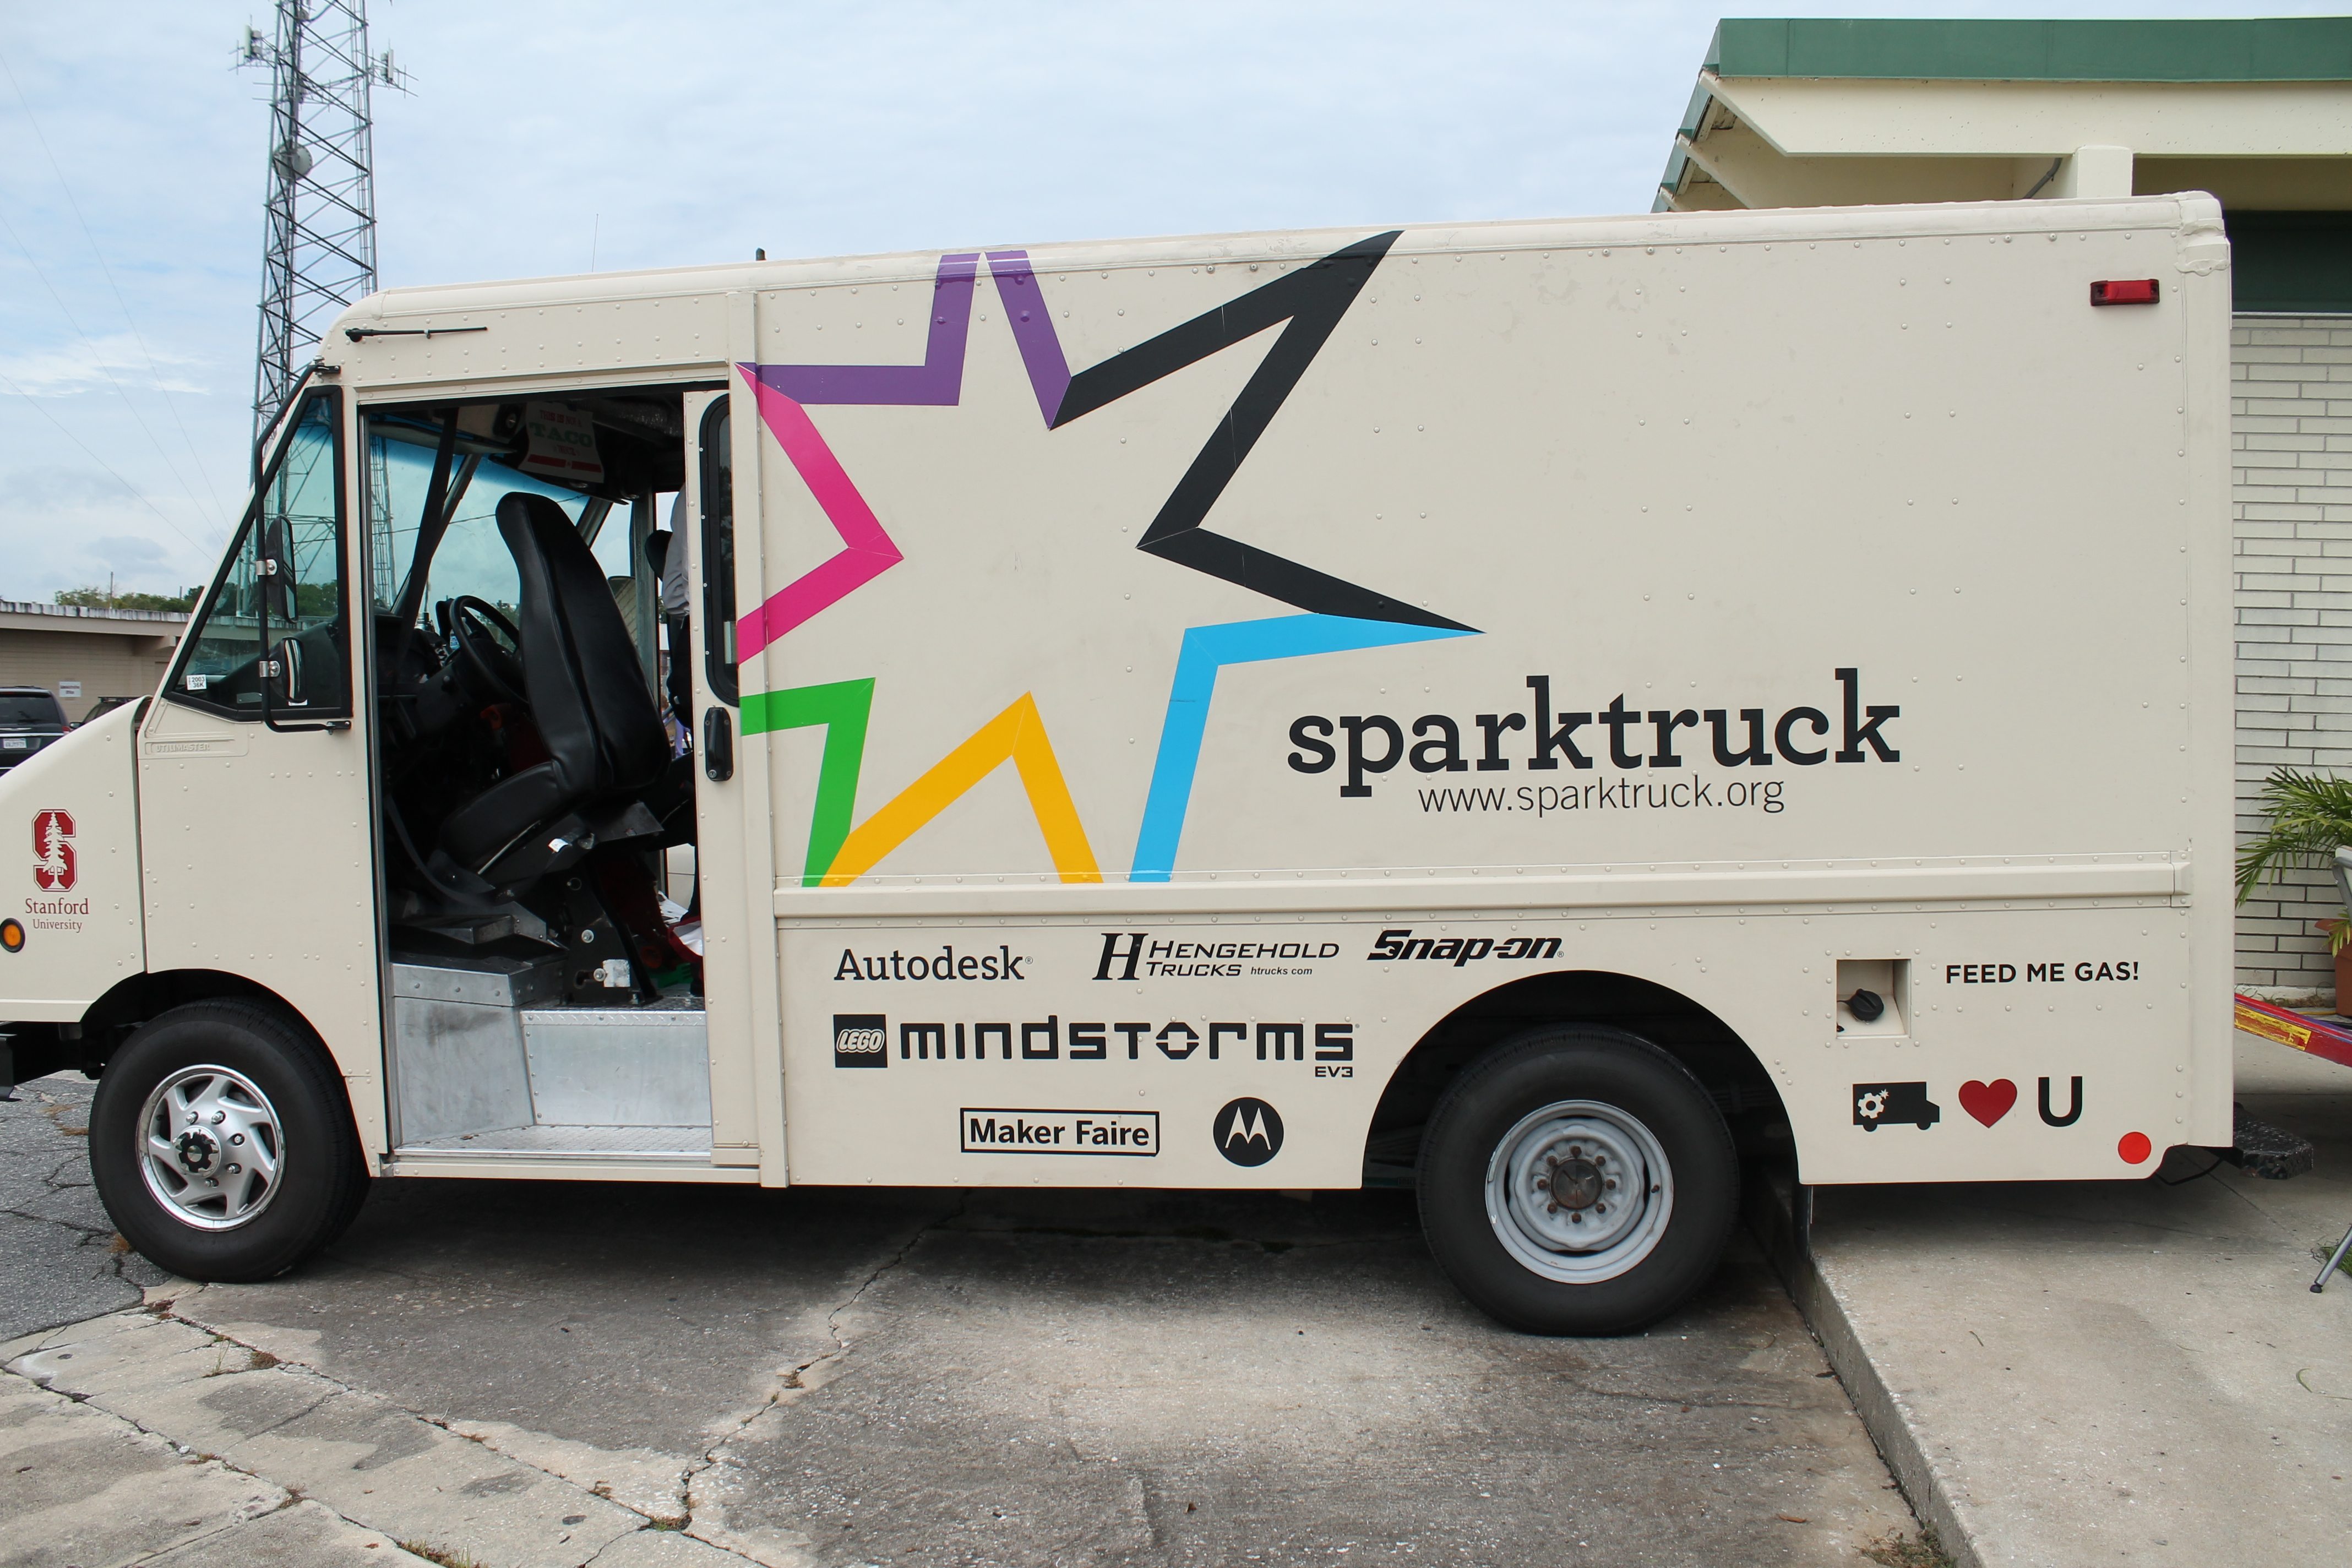 Cade Museum Brings the SparkTruck to Gainesville